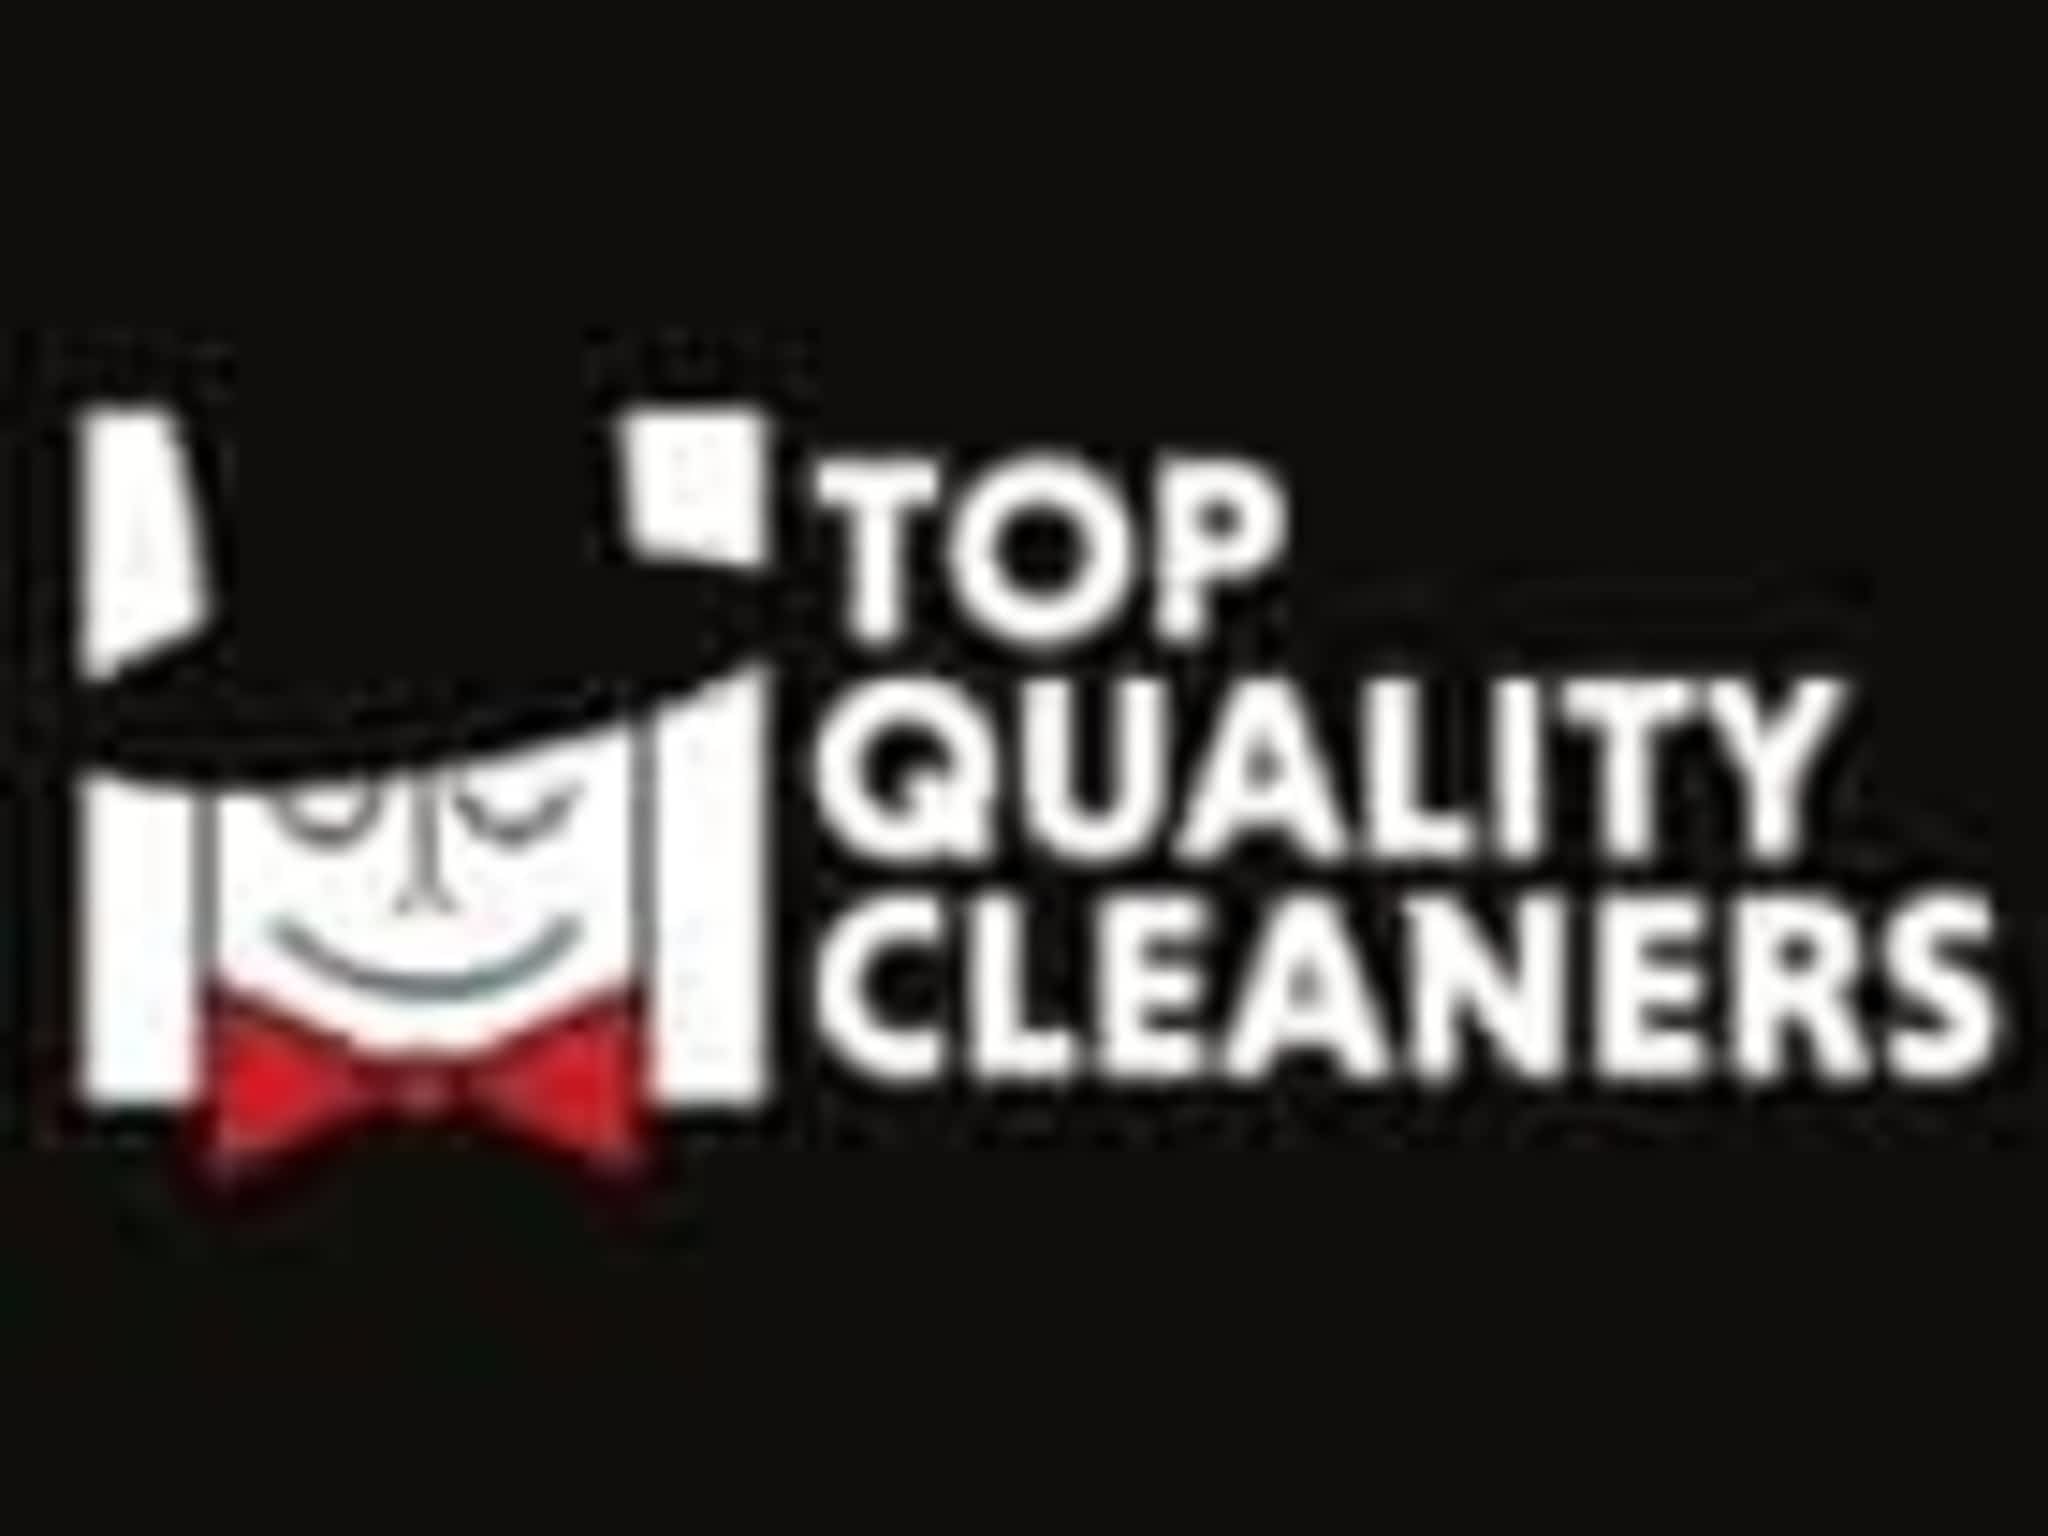 photo Top Quality Cleaners